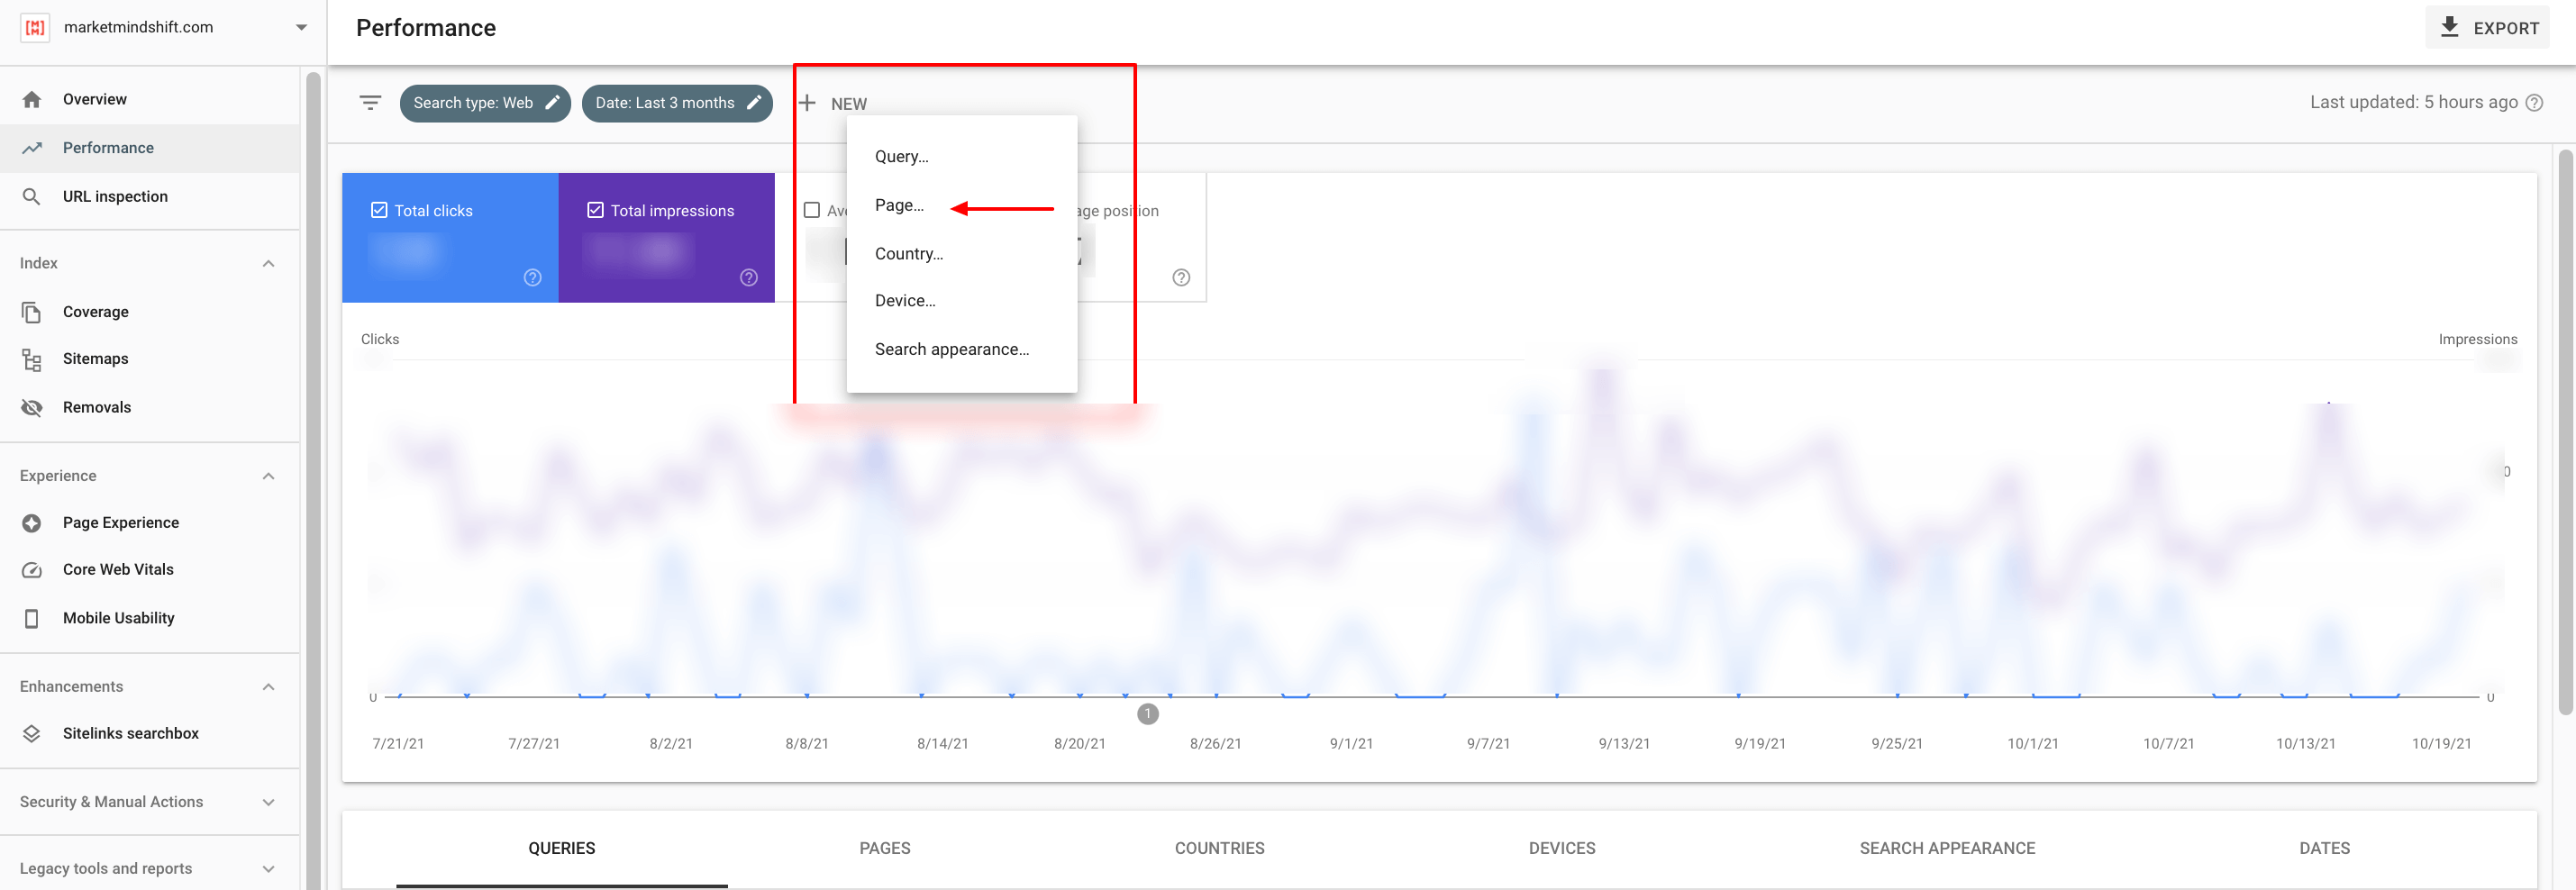 Google Search Console performance.